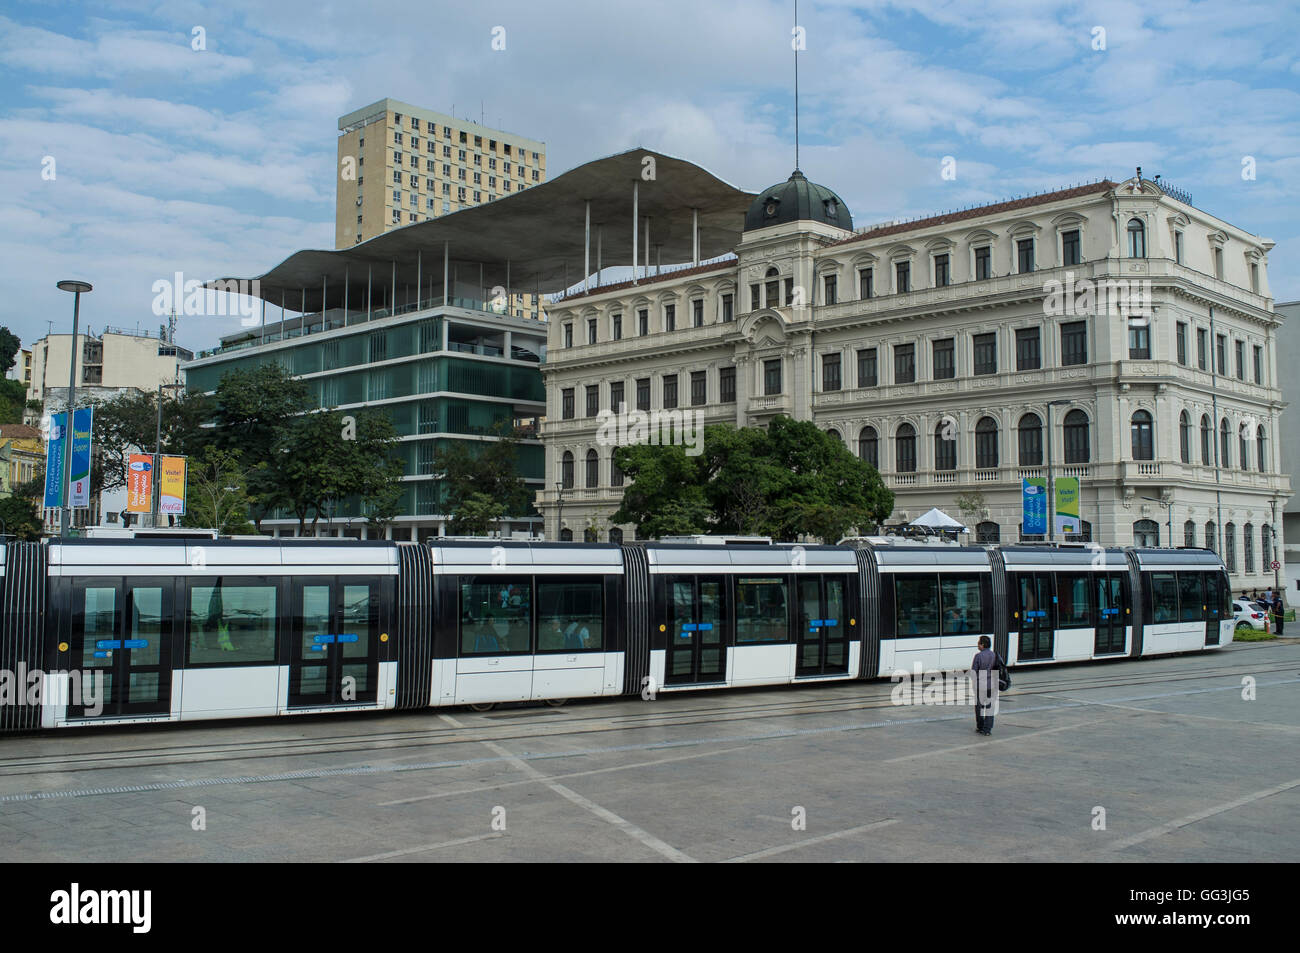 Rio de Janeiro Light Rail ( Portuguese - VLT do Rio de Janeiro or VLT Carioca ), a light rail system opened in June 2016 ahead of the 2016 Olympic Games passes in front of Rio de Janeiro Art Museum ( Museu de Arte do Rio - MAR ) in Rio de Janeiro port surrounding area, Brazil, part of the Porto Maravilha Project ( Marvelous Port Program ), a revitalization project of the city Port Zone. Stock Photo